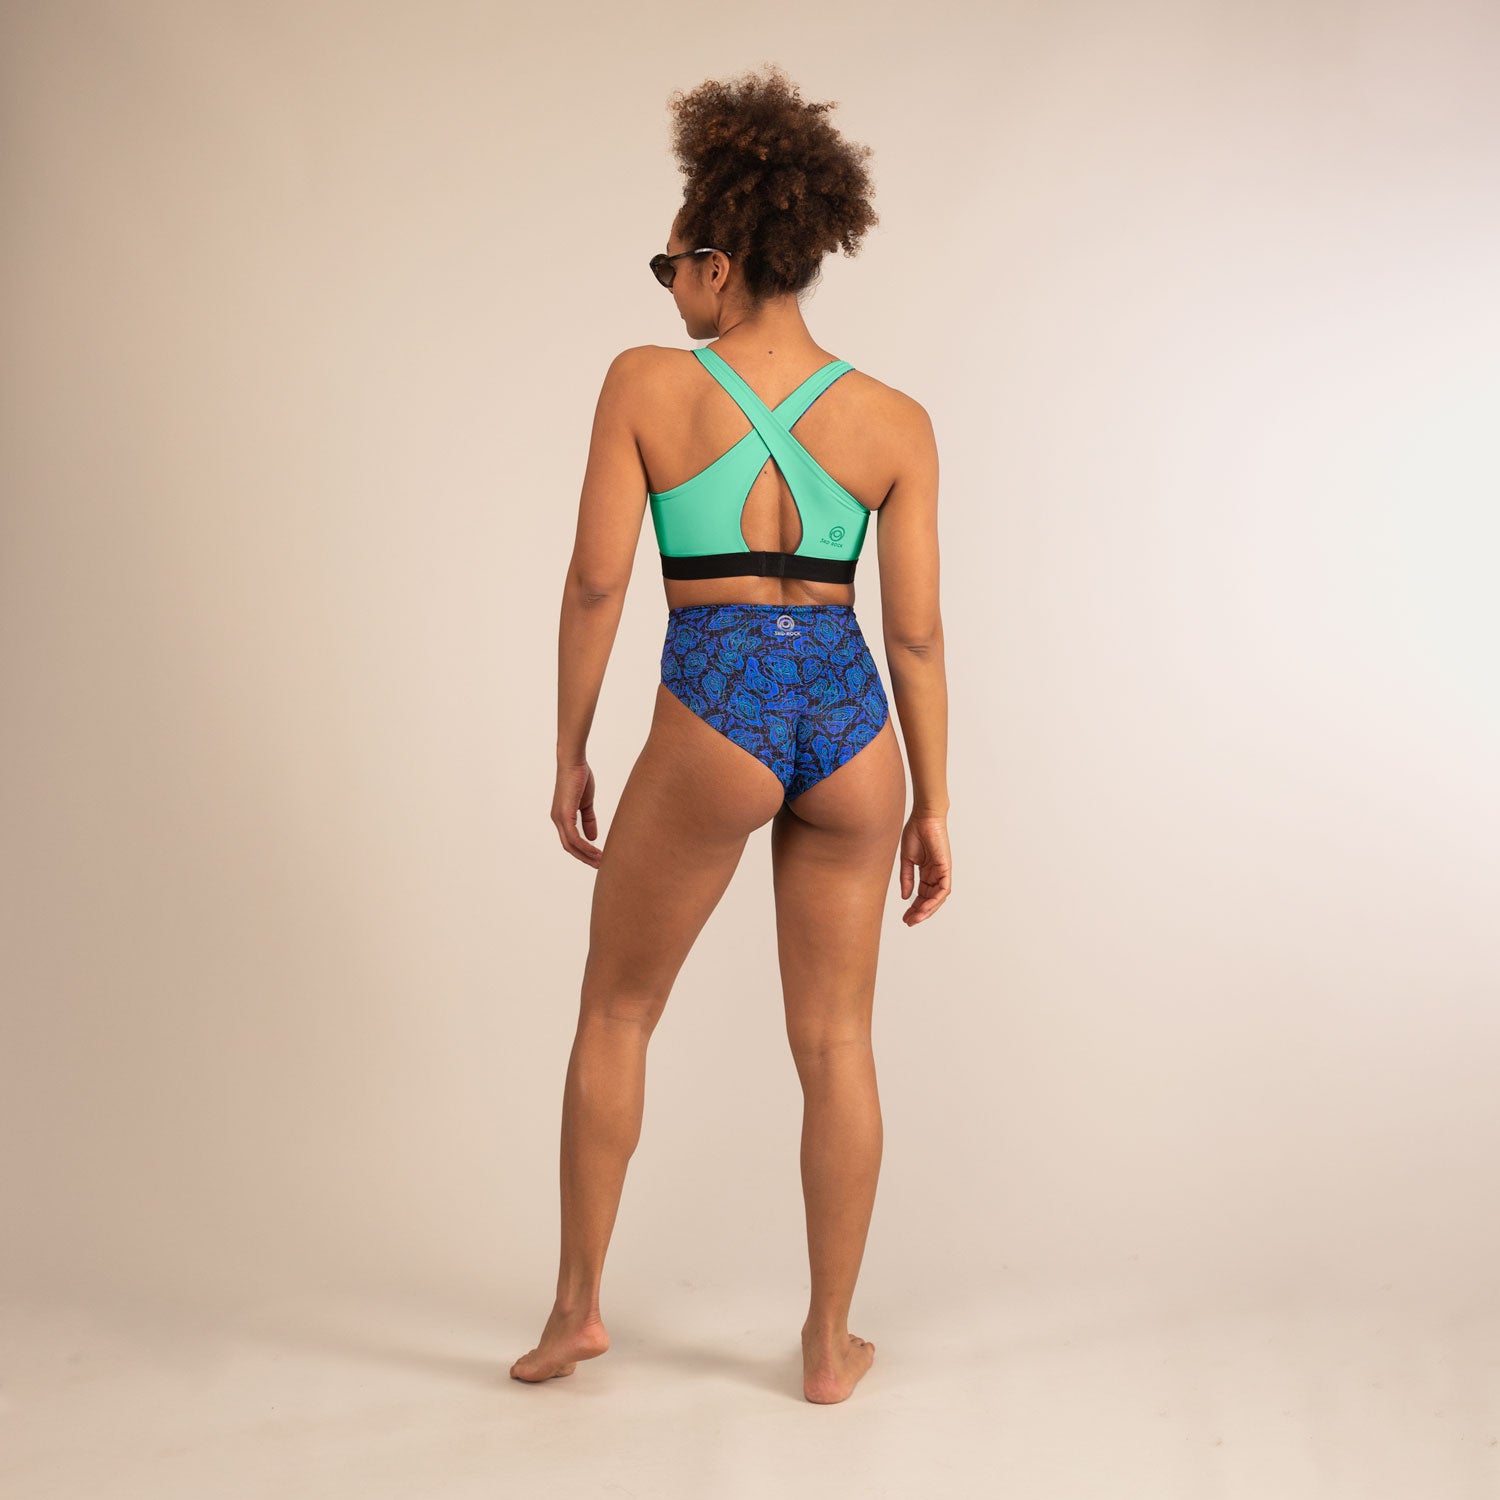 TIDE GEO JAGUAR | High Cut Recycled Bikini Bottoms | 3RD ROCK Clothing -  Kendal is 5ft 7 with a 28" waist, 38" hips and wears a size 12 F